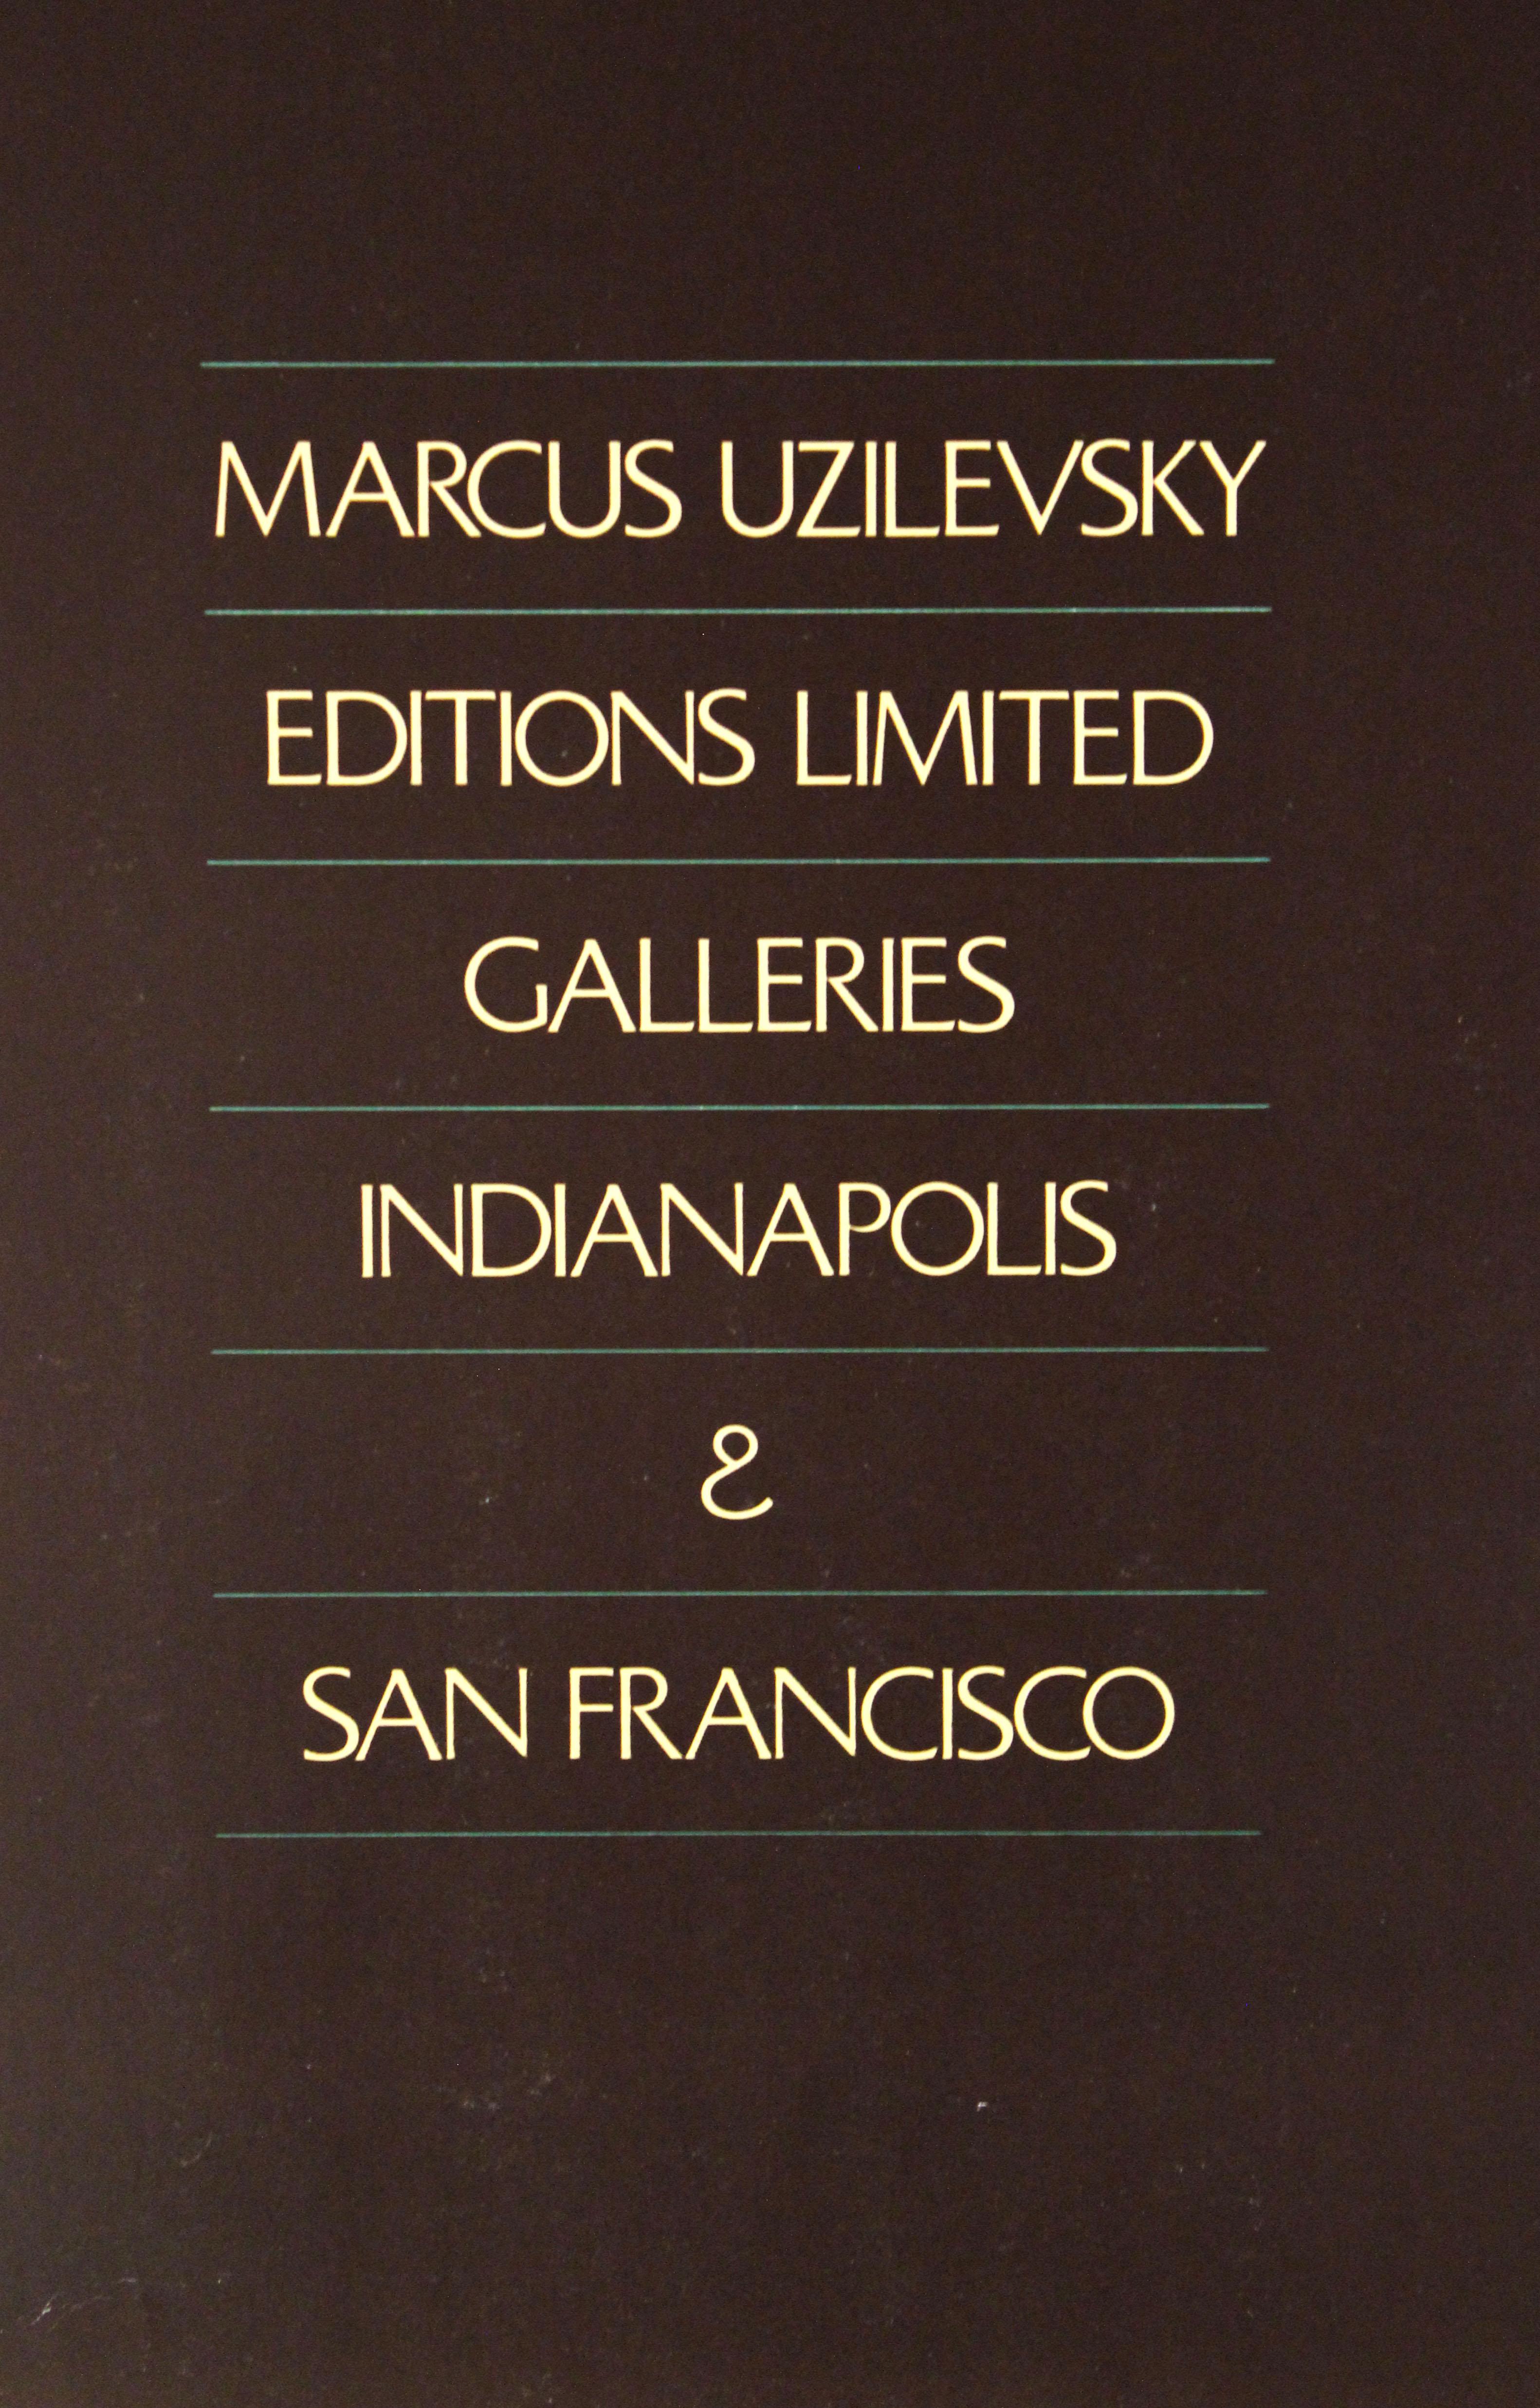 Poster-Editions Limited Galleries-Indianapolis & San Francisco - Print by Marcus Uzilevsky